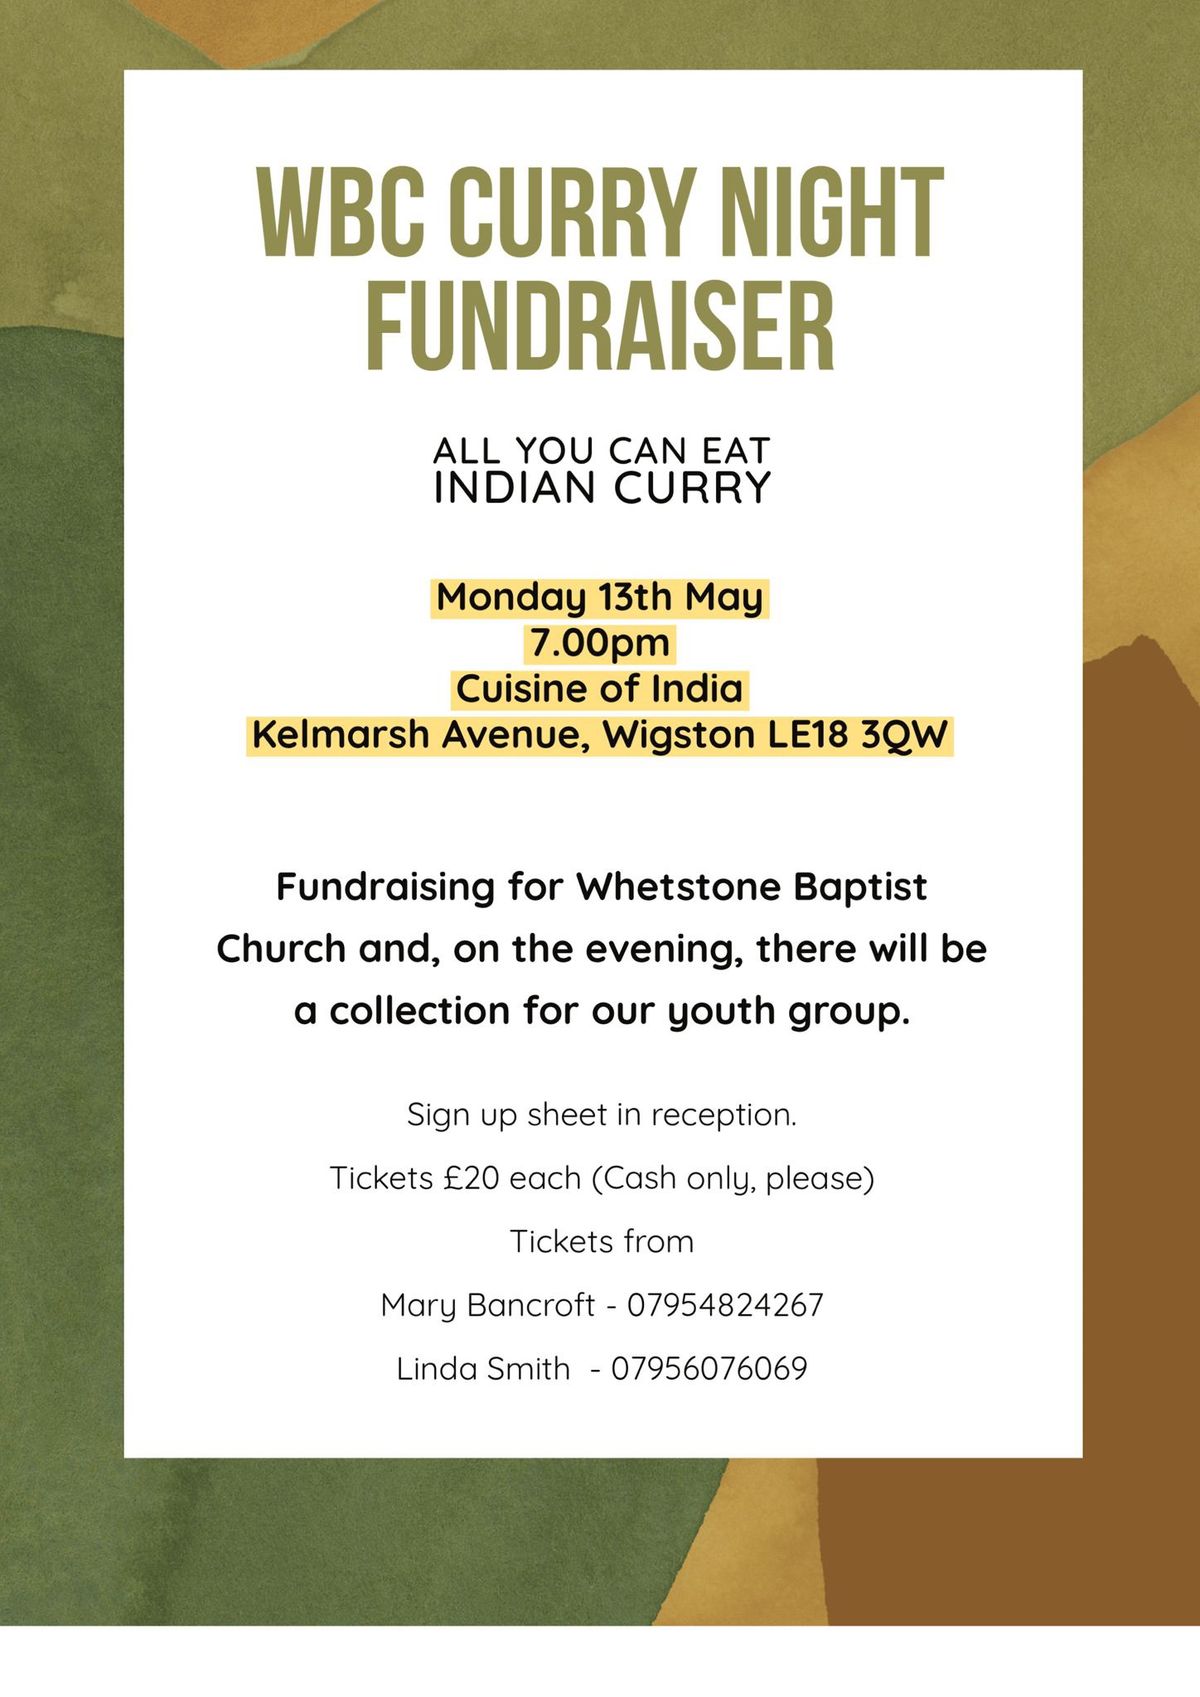 Curry Night Fundraiser for WBC